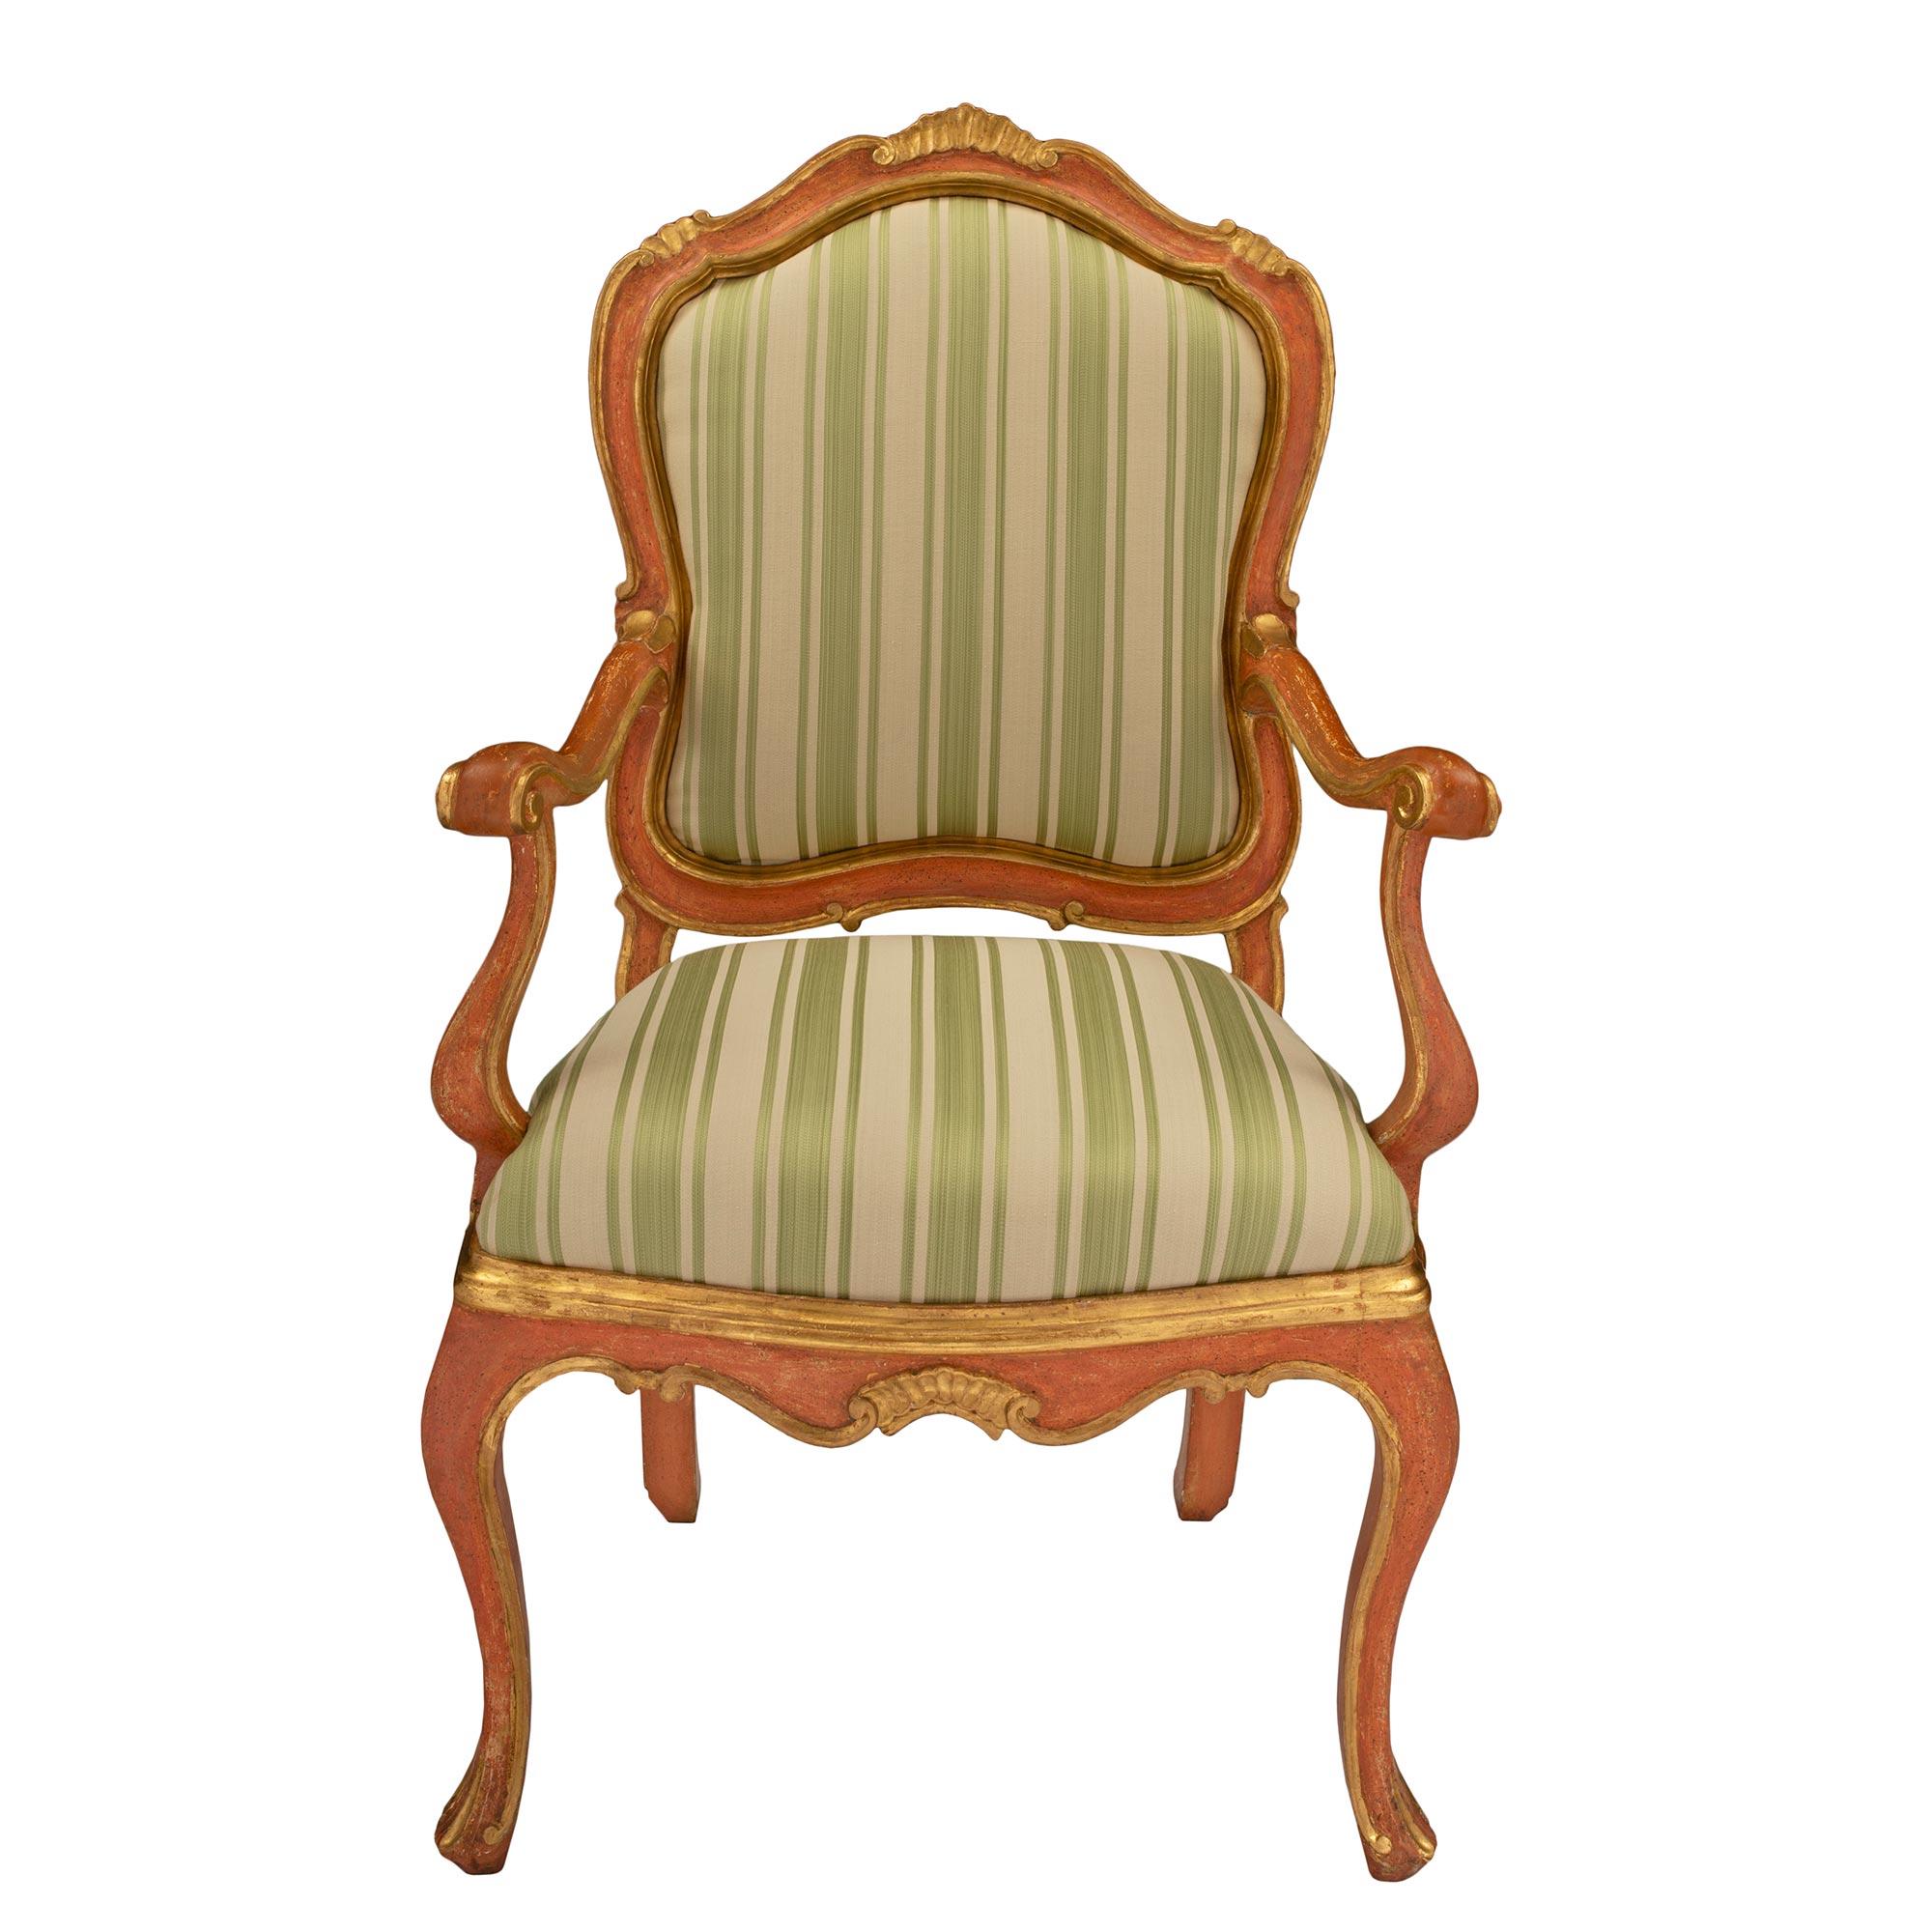 A beautiful and complete set of six Italian 18th century polychrome and giltwood Venetian armchairs. Each dark apricot colored polychrome armchair is raised by elegant cabriole legs with a fine giltwood fillet, which extends along the arbalest